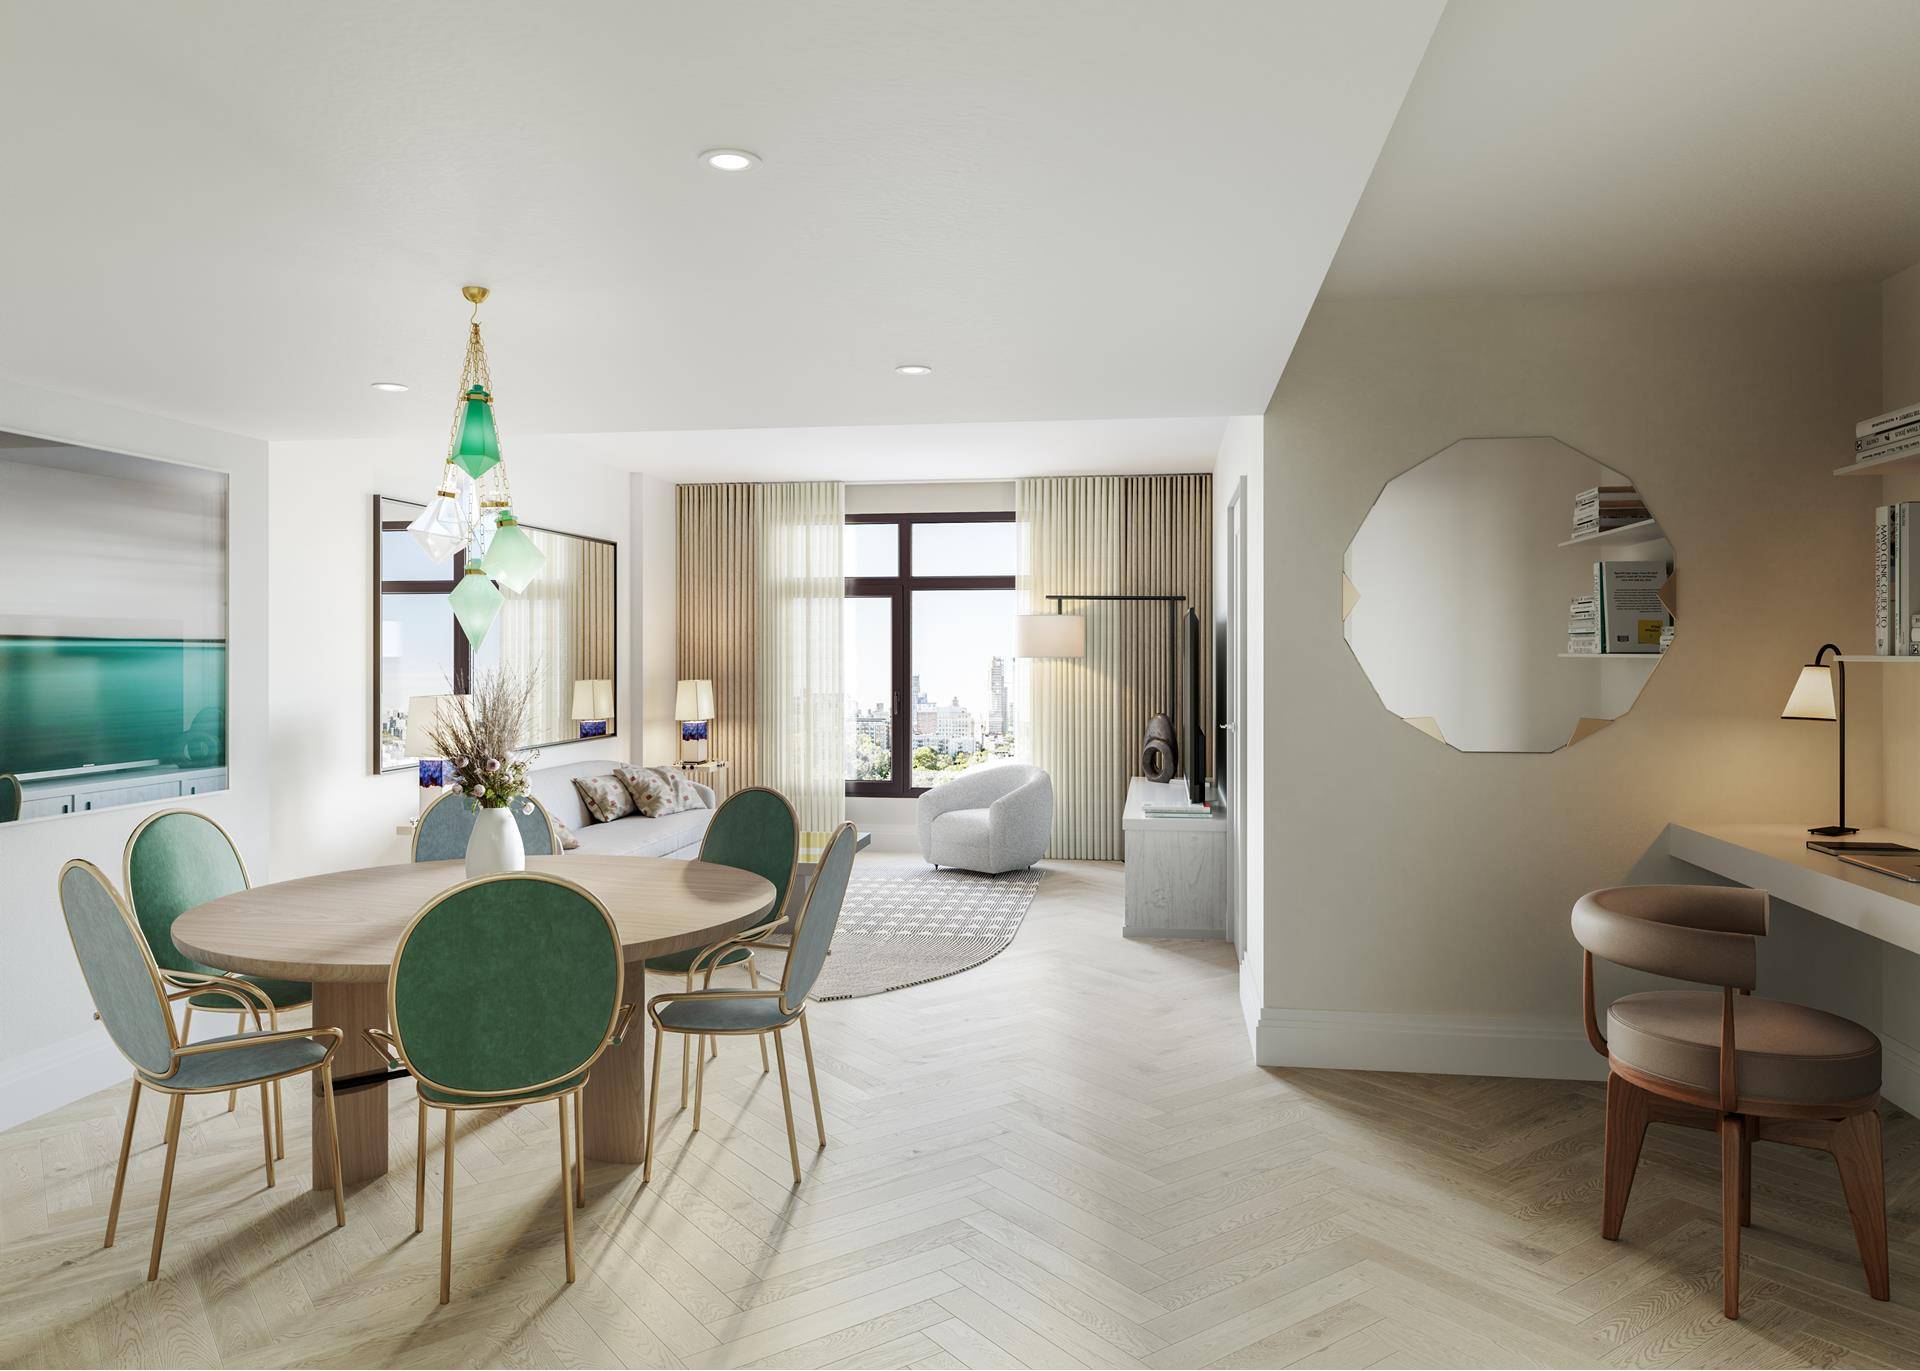 Sales Gallery Now Open By Appointment Introducing residence 6R at 300 West, a northwestern facing studio offering an open concept living area that boasts custom White Oak herringbone flooring, central ...